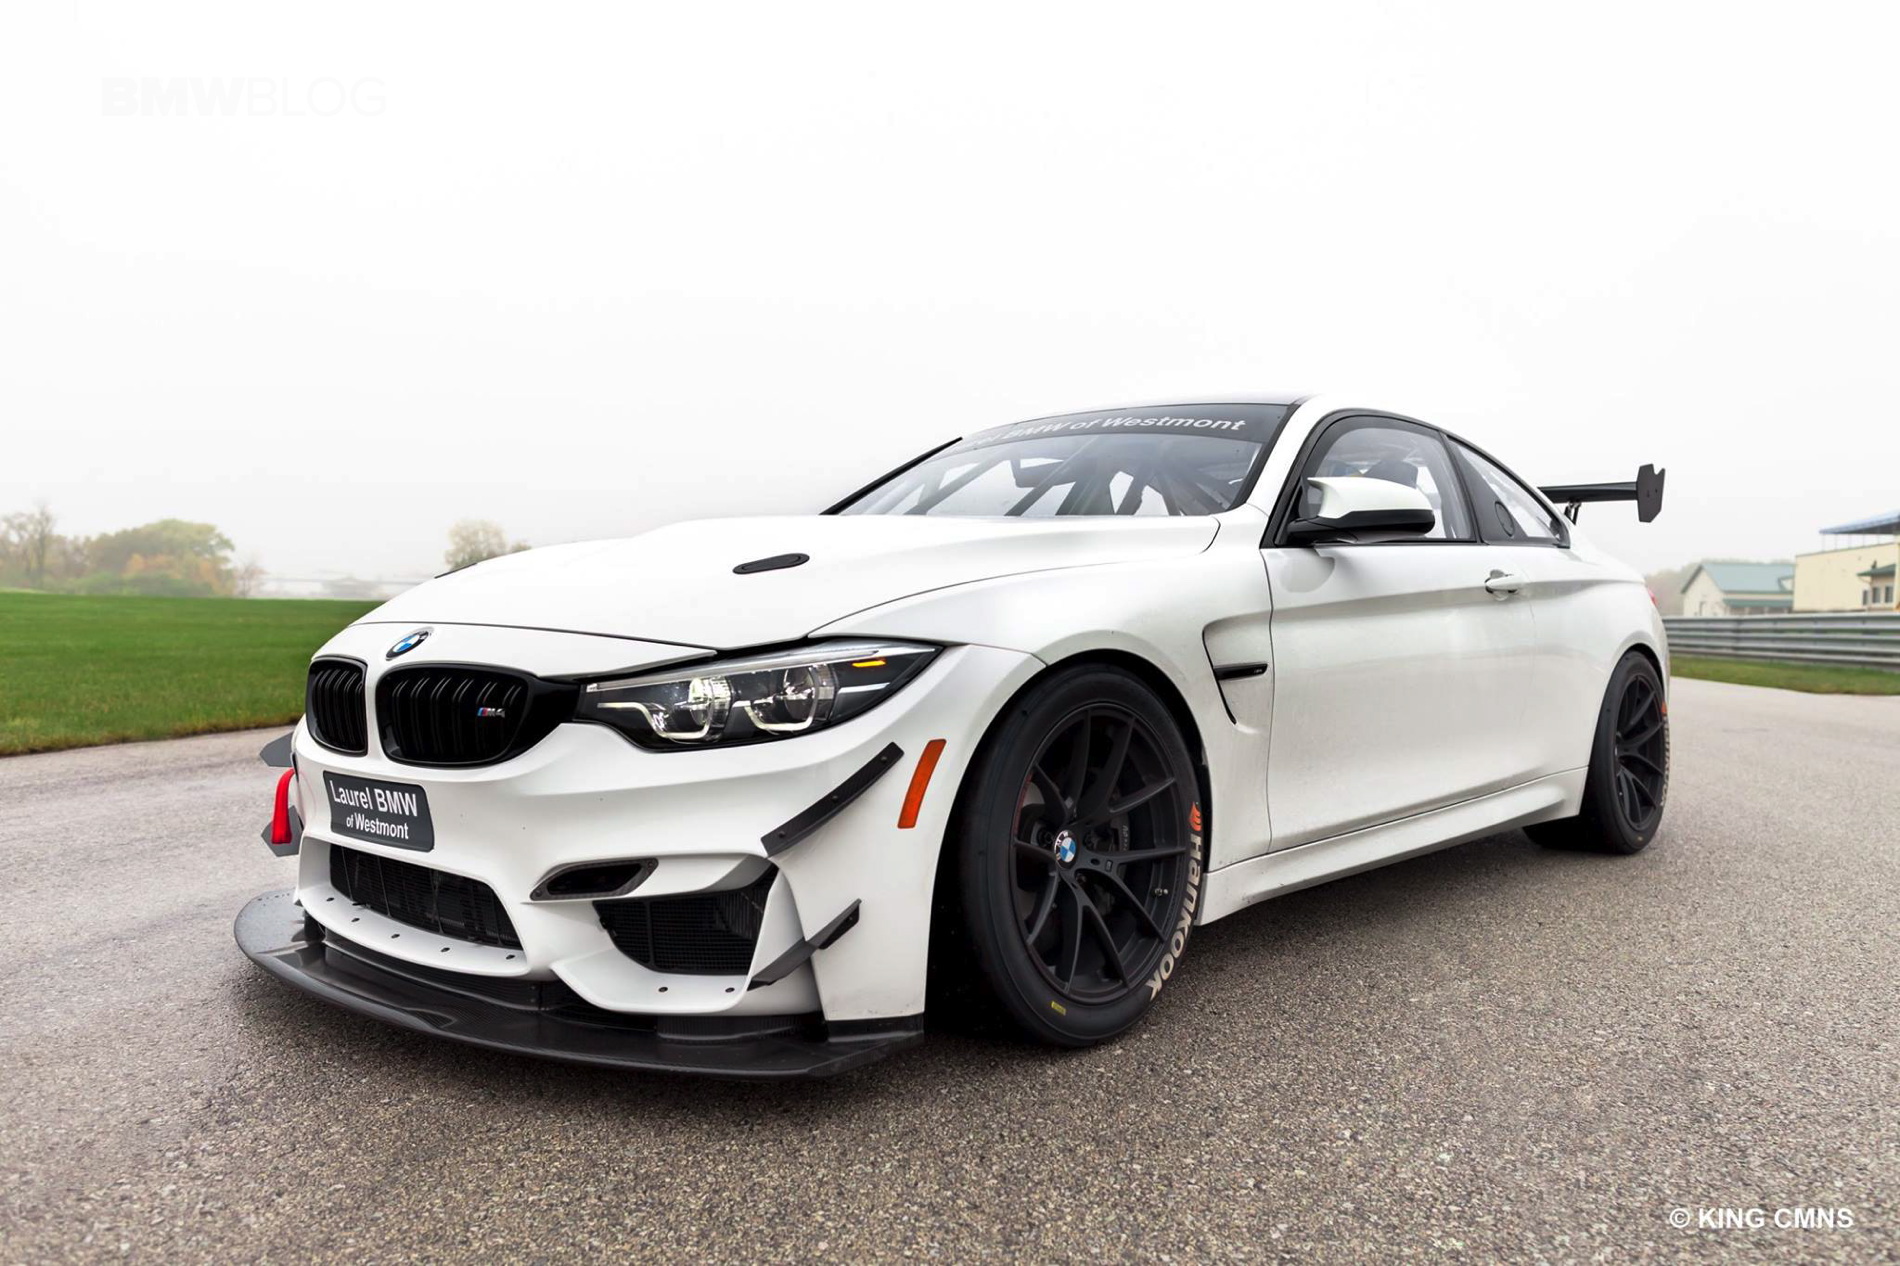 Photoshoot with the BMW M4 GT4